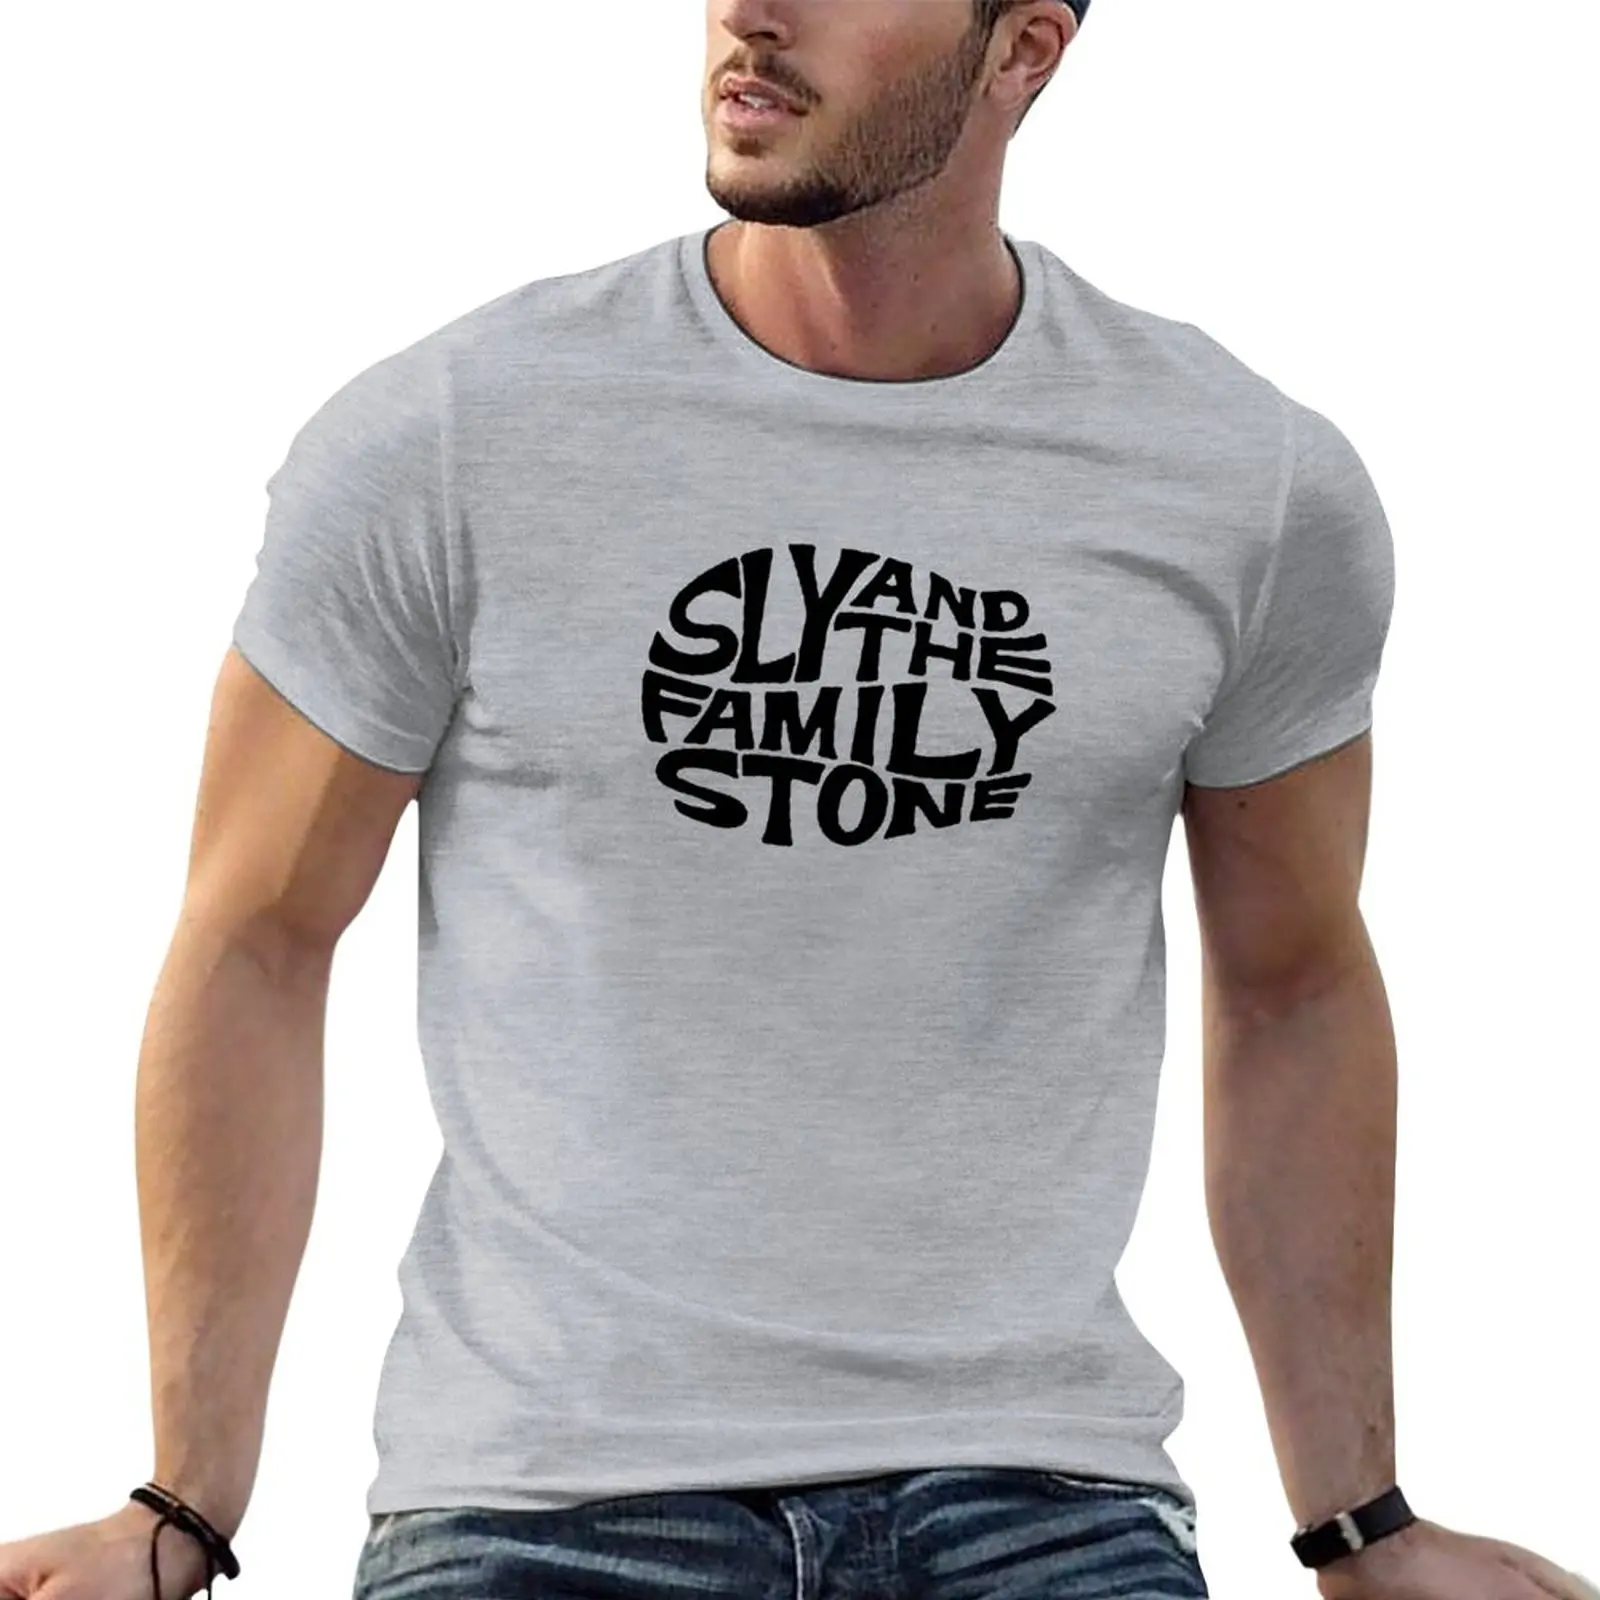 New Sly and the Family Stone T-Shirt summer tops cute tops shirts graphic tees black t-shirts for men new 2021 summer boys t shirt toddler girl tees t shirt for girls tops cotton children s tshirts for boy child shirts kids tops